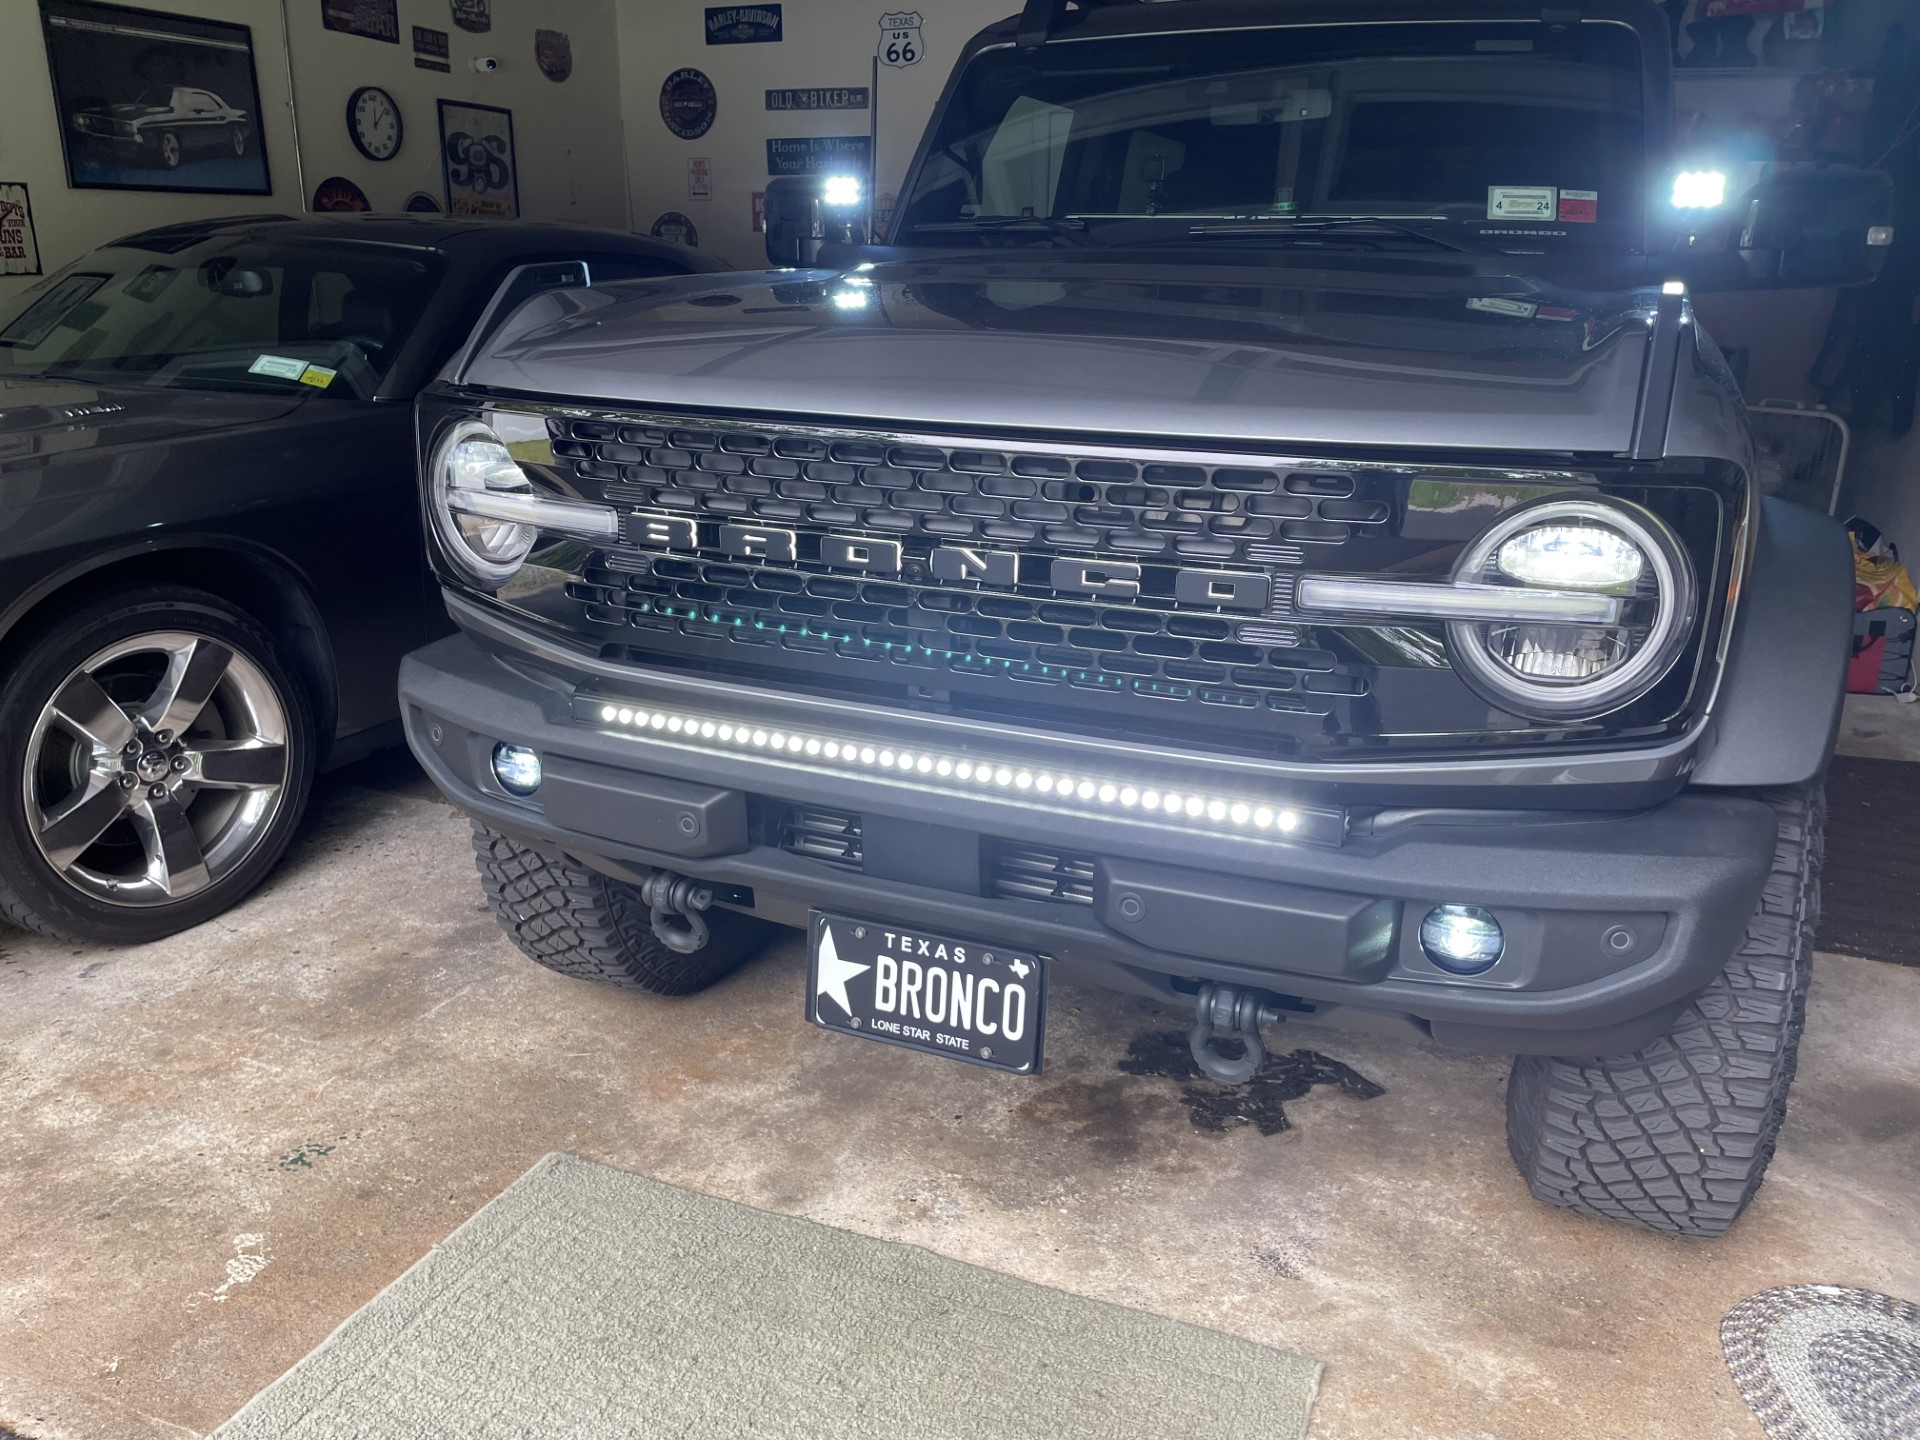 Ford Bronco Inadequate Headlight Brightness. Aftermarket head light recommendations? Blue Lights On